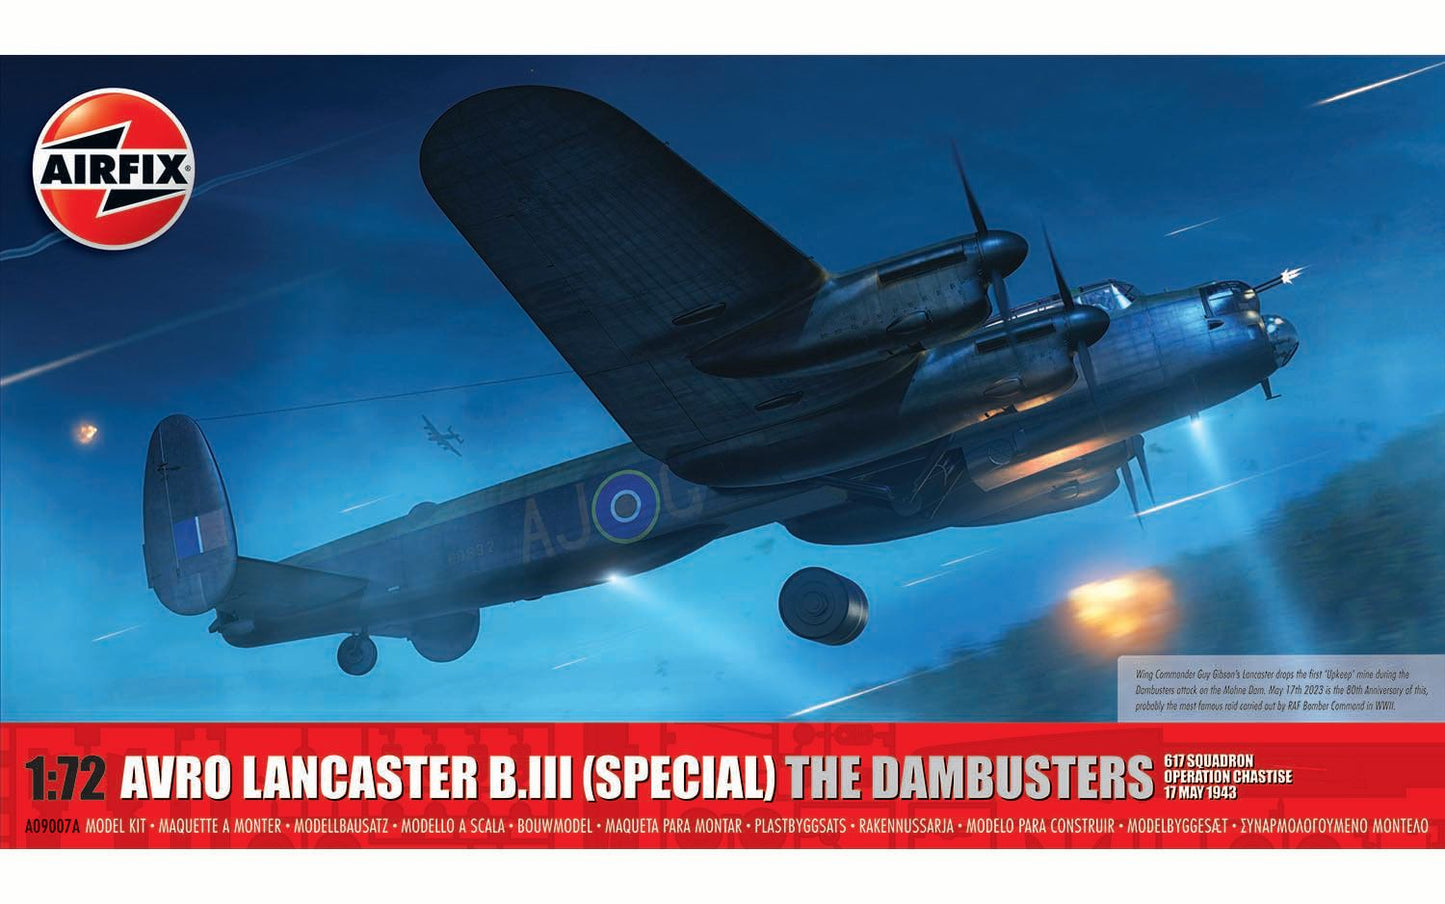 Airfix Products A09007A 1:72 Avro Lancaster B.III Special Aircraft Model Kit